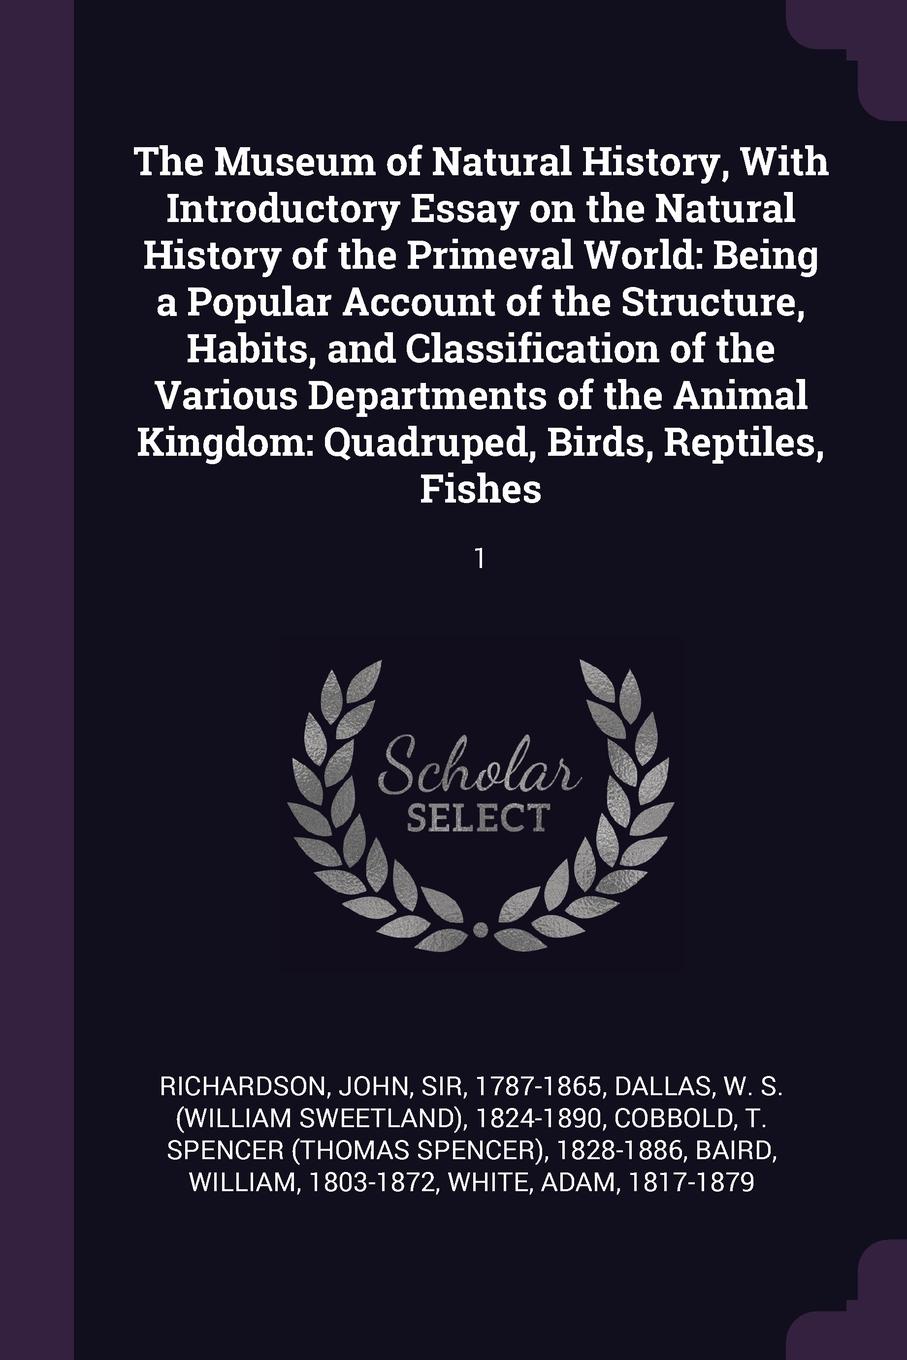 The Museum of Natural History, With Introductory Essay on the Natural History of the Primeval World. Being a Popular Account of the Structure, Habits, and Classification of the Various Departments of the Animal Kingdom: Quadruped, Birds, Reptiles,...